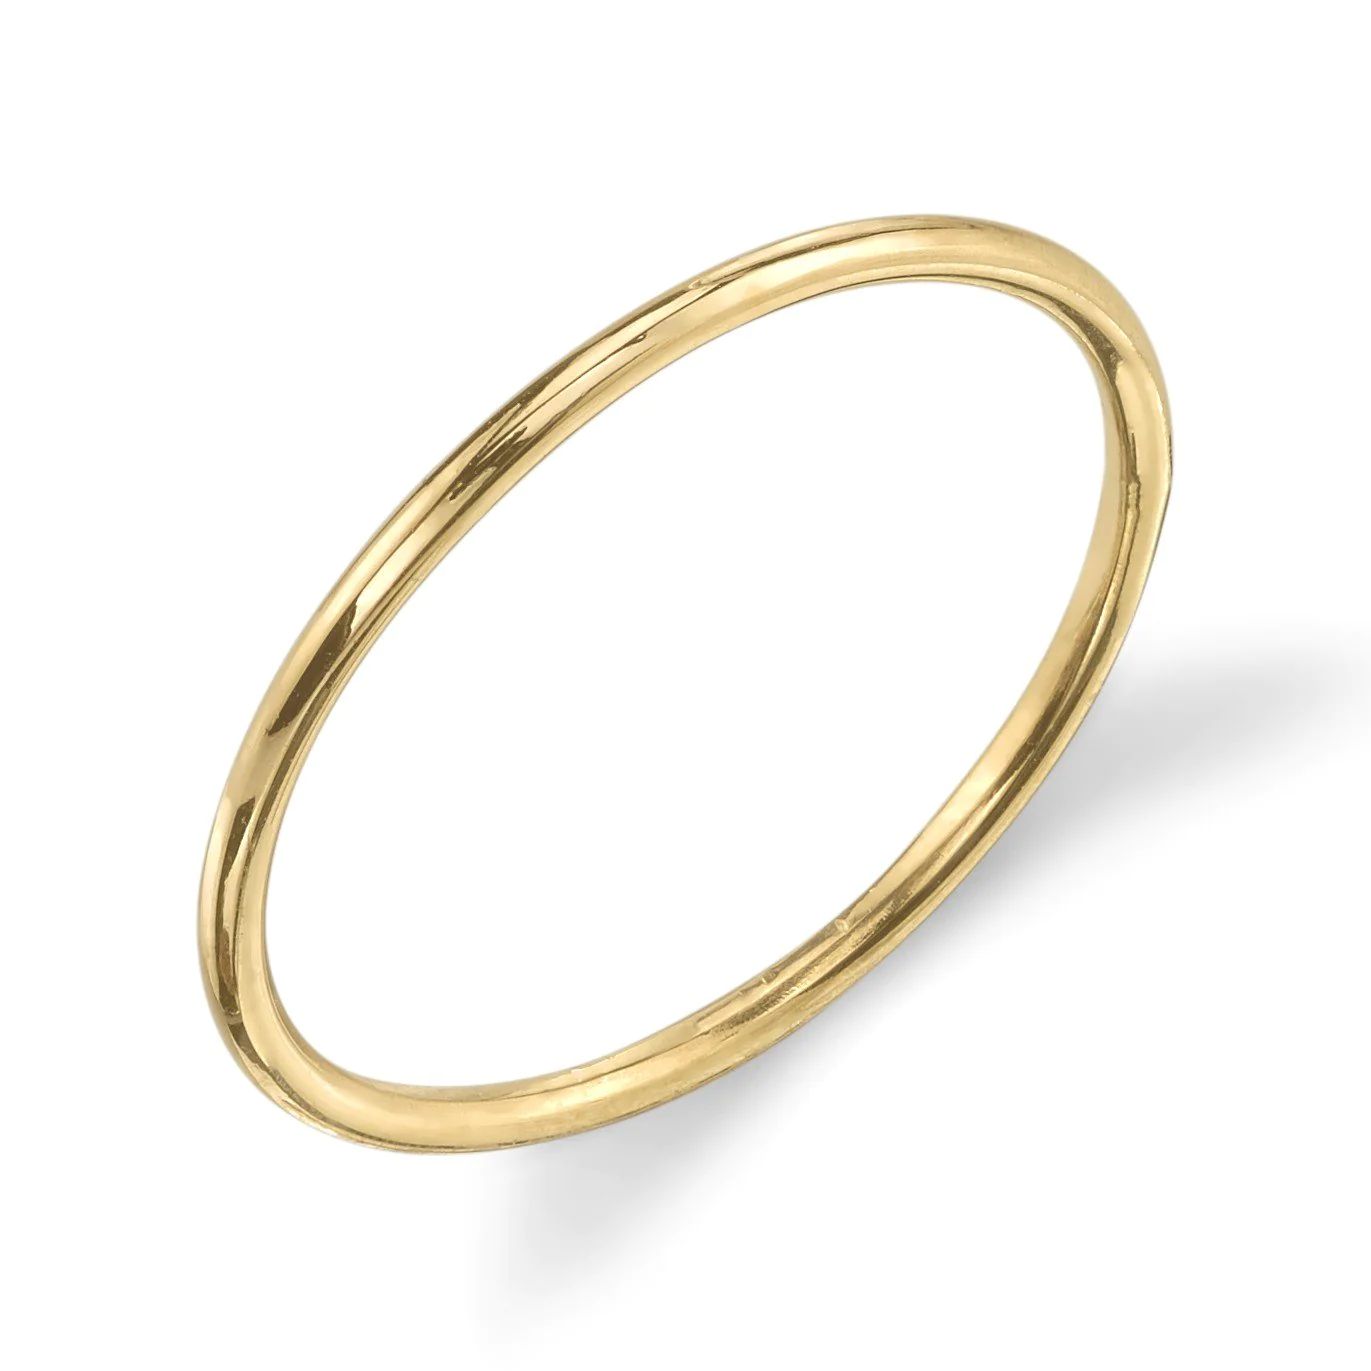 LITTLE GOLD BAND | Starling Jewelry